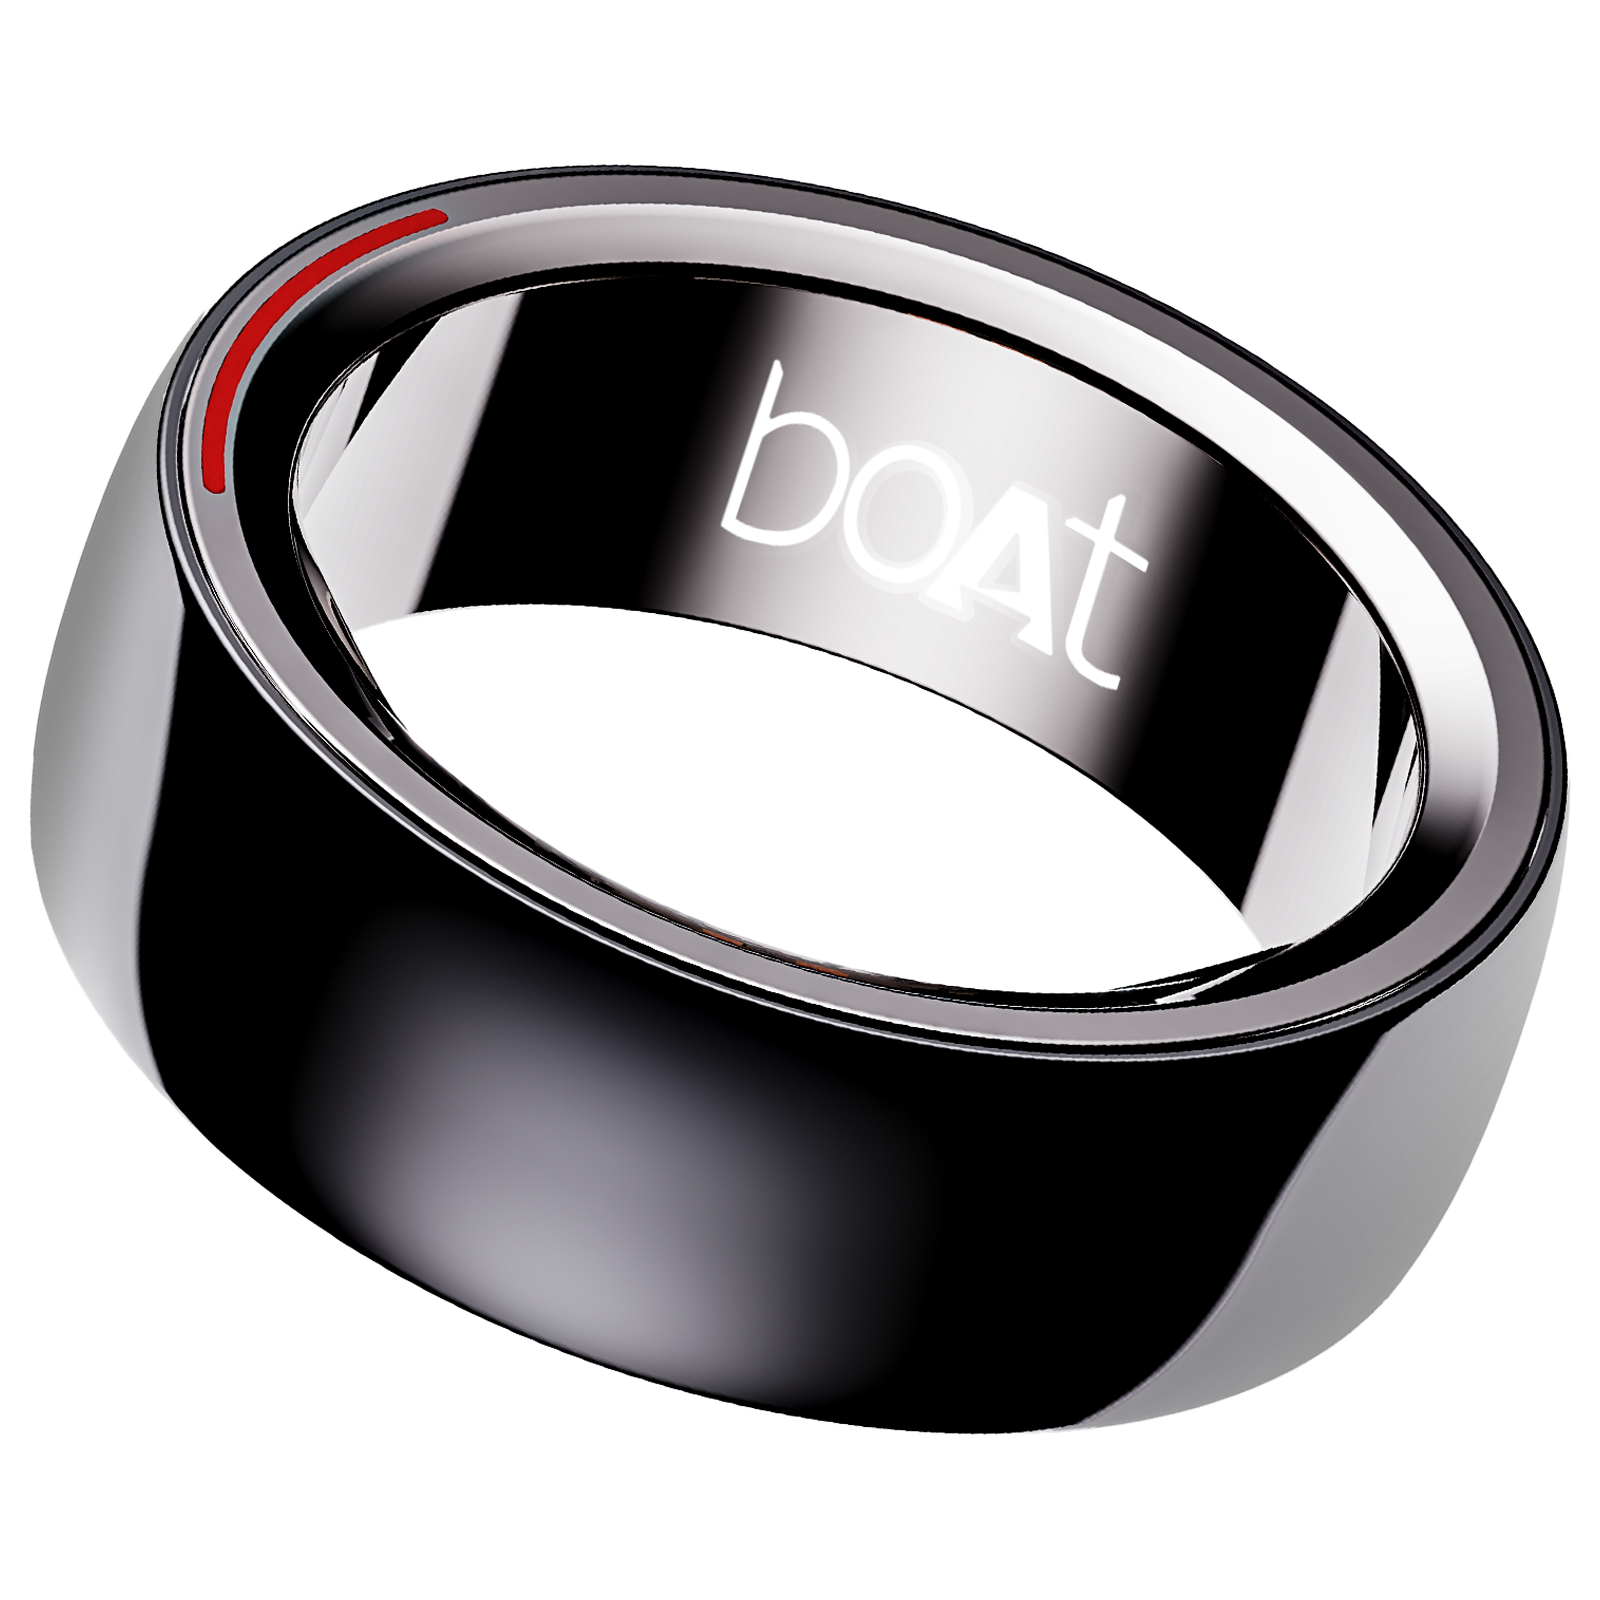 Buy boAt Gen 1 S7 Smart Ring with Activity Tracker (5ATM Water Resistant,  Charcoal Black) Online - Croma